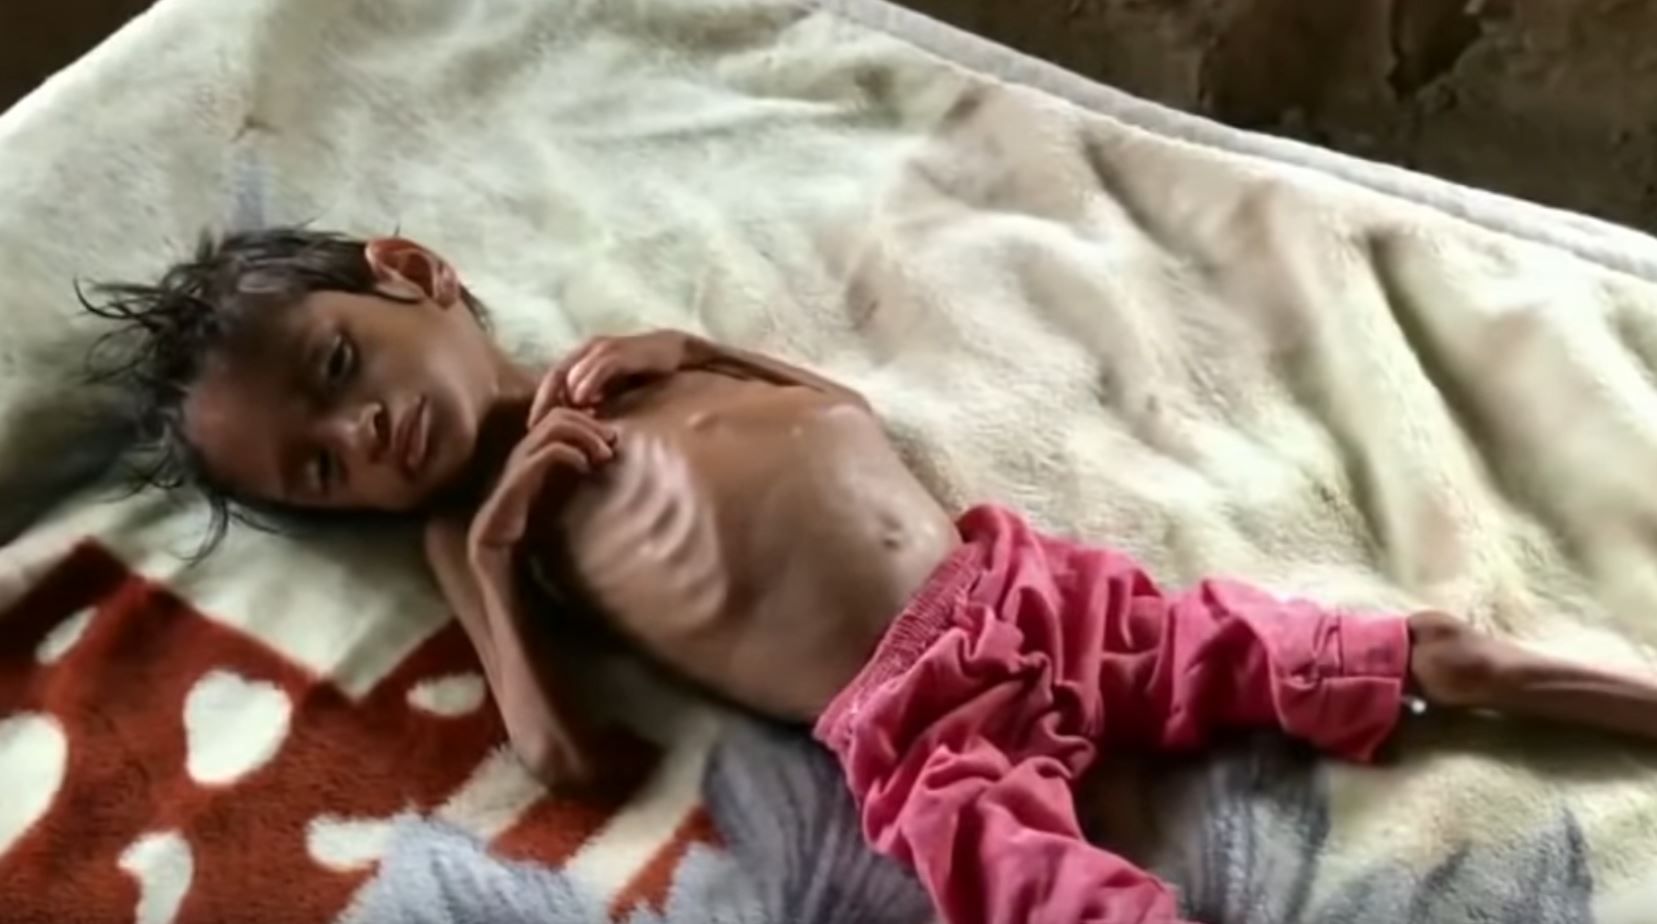 Millions of children face starvation in Yemen warns United Nations